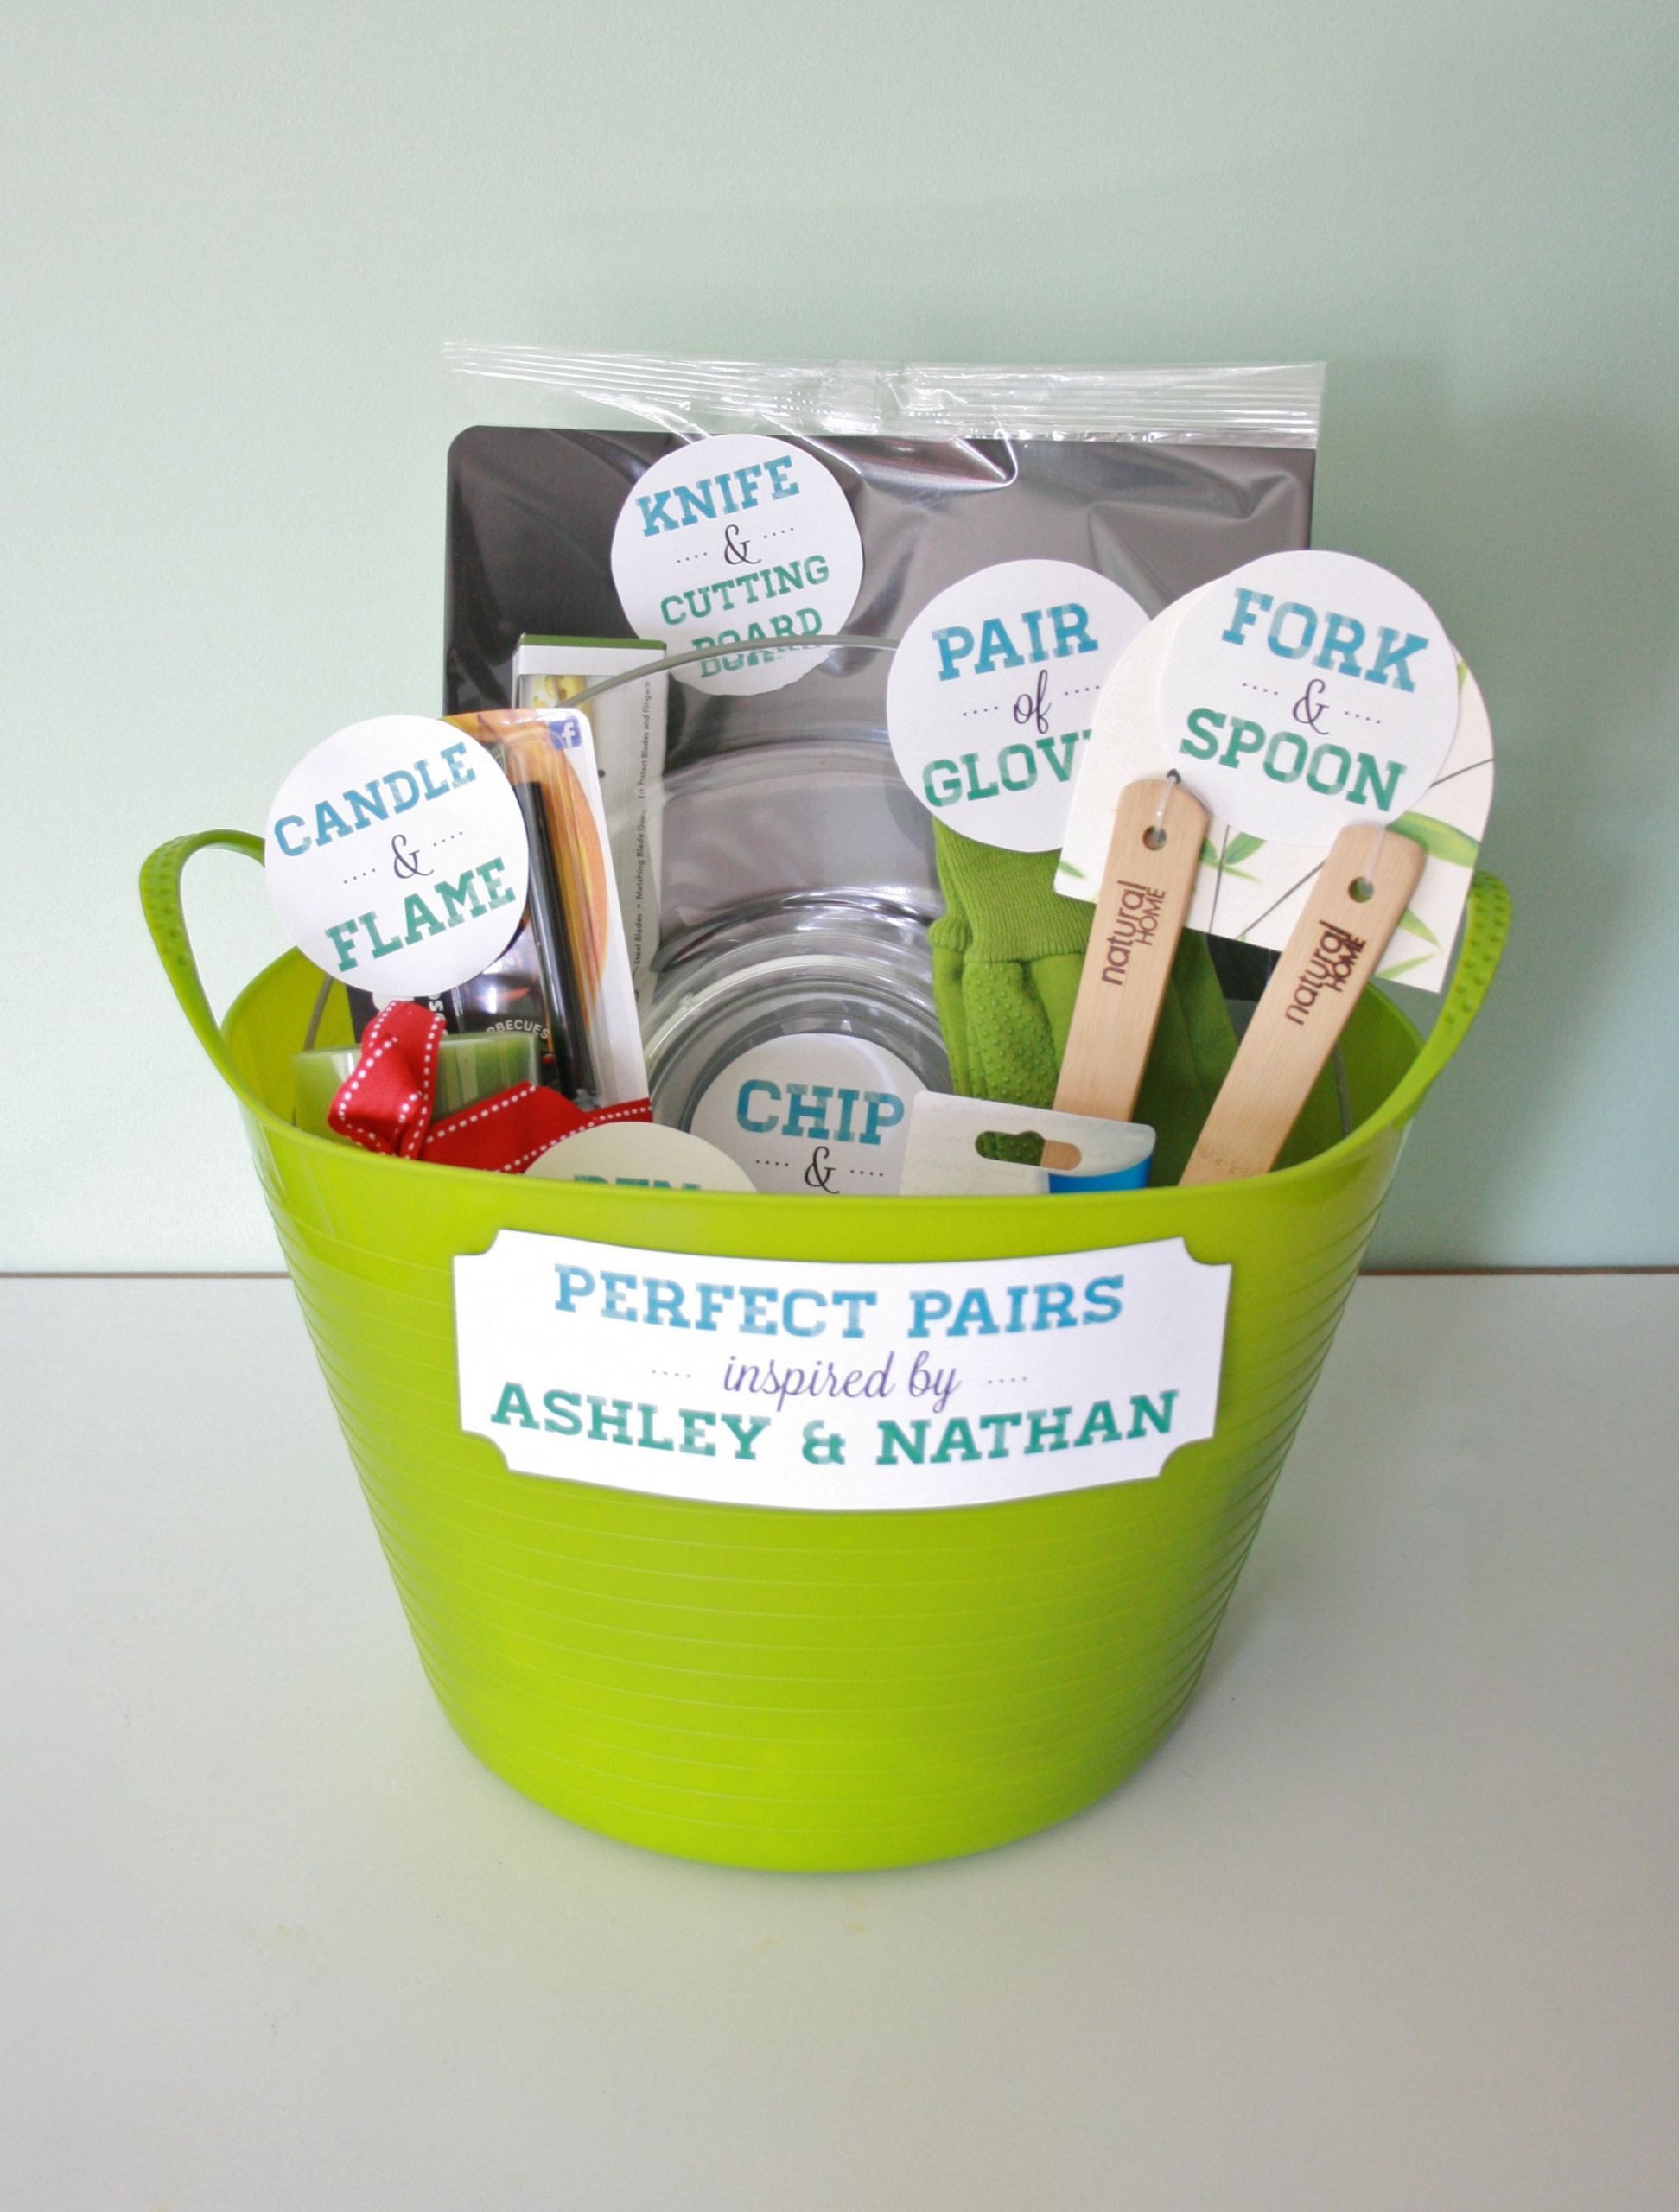 Couples Wedding Shower Gift Ideas
 DIY "Perfect Pairs" Bridal Shower Gift